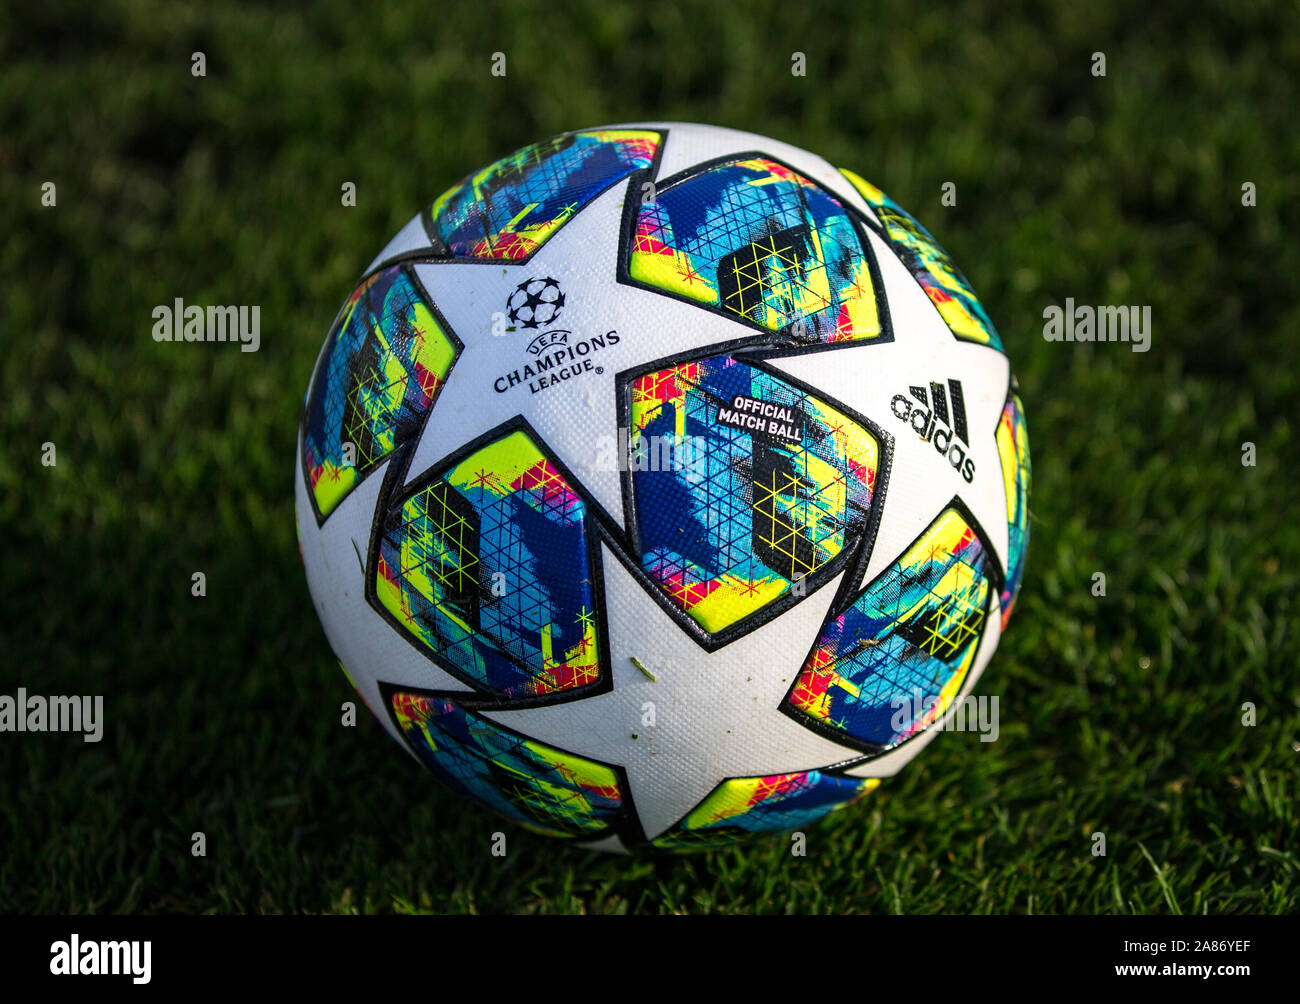 Adidas 2020 Finale Champions League Official Match Ball during the UEFA Youth League group match between Chelsea U19 and Ajax U19 at the Chelsea Training Cobham, England on 5 November 2019.